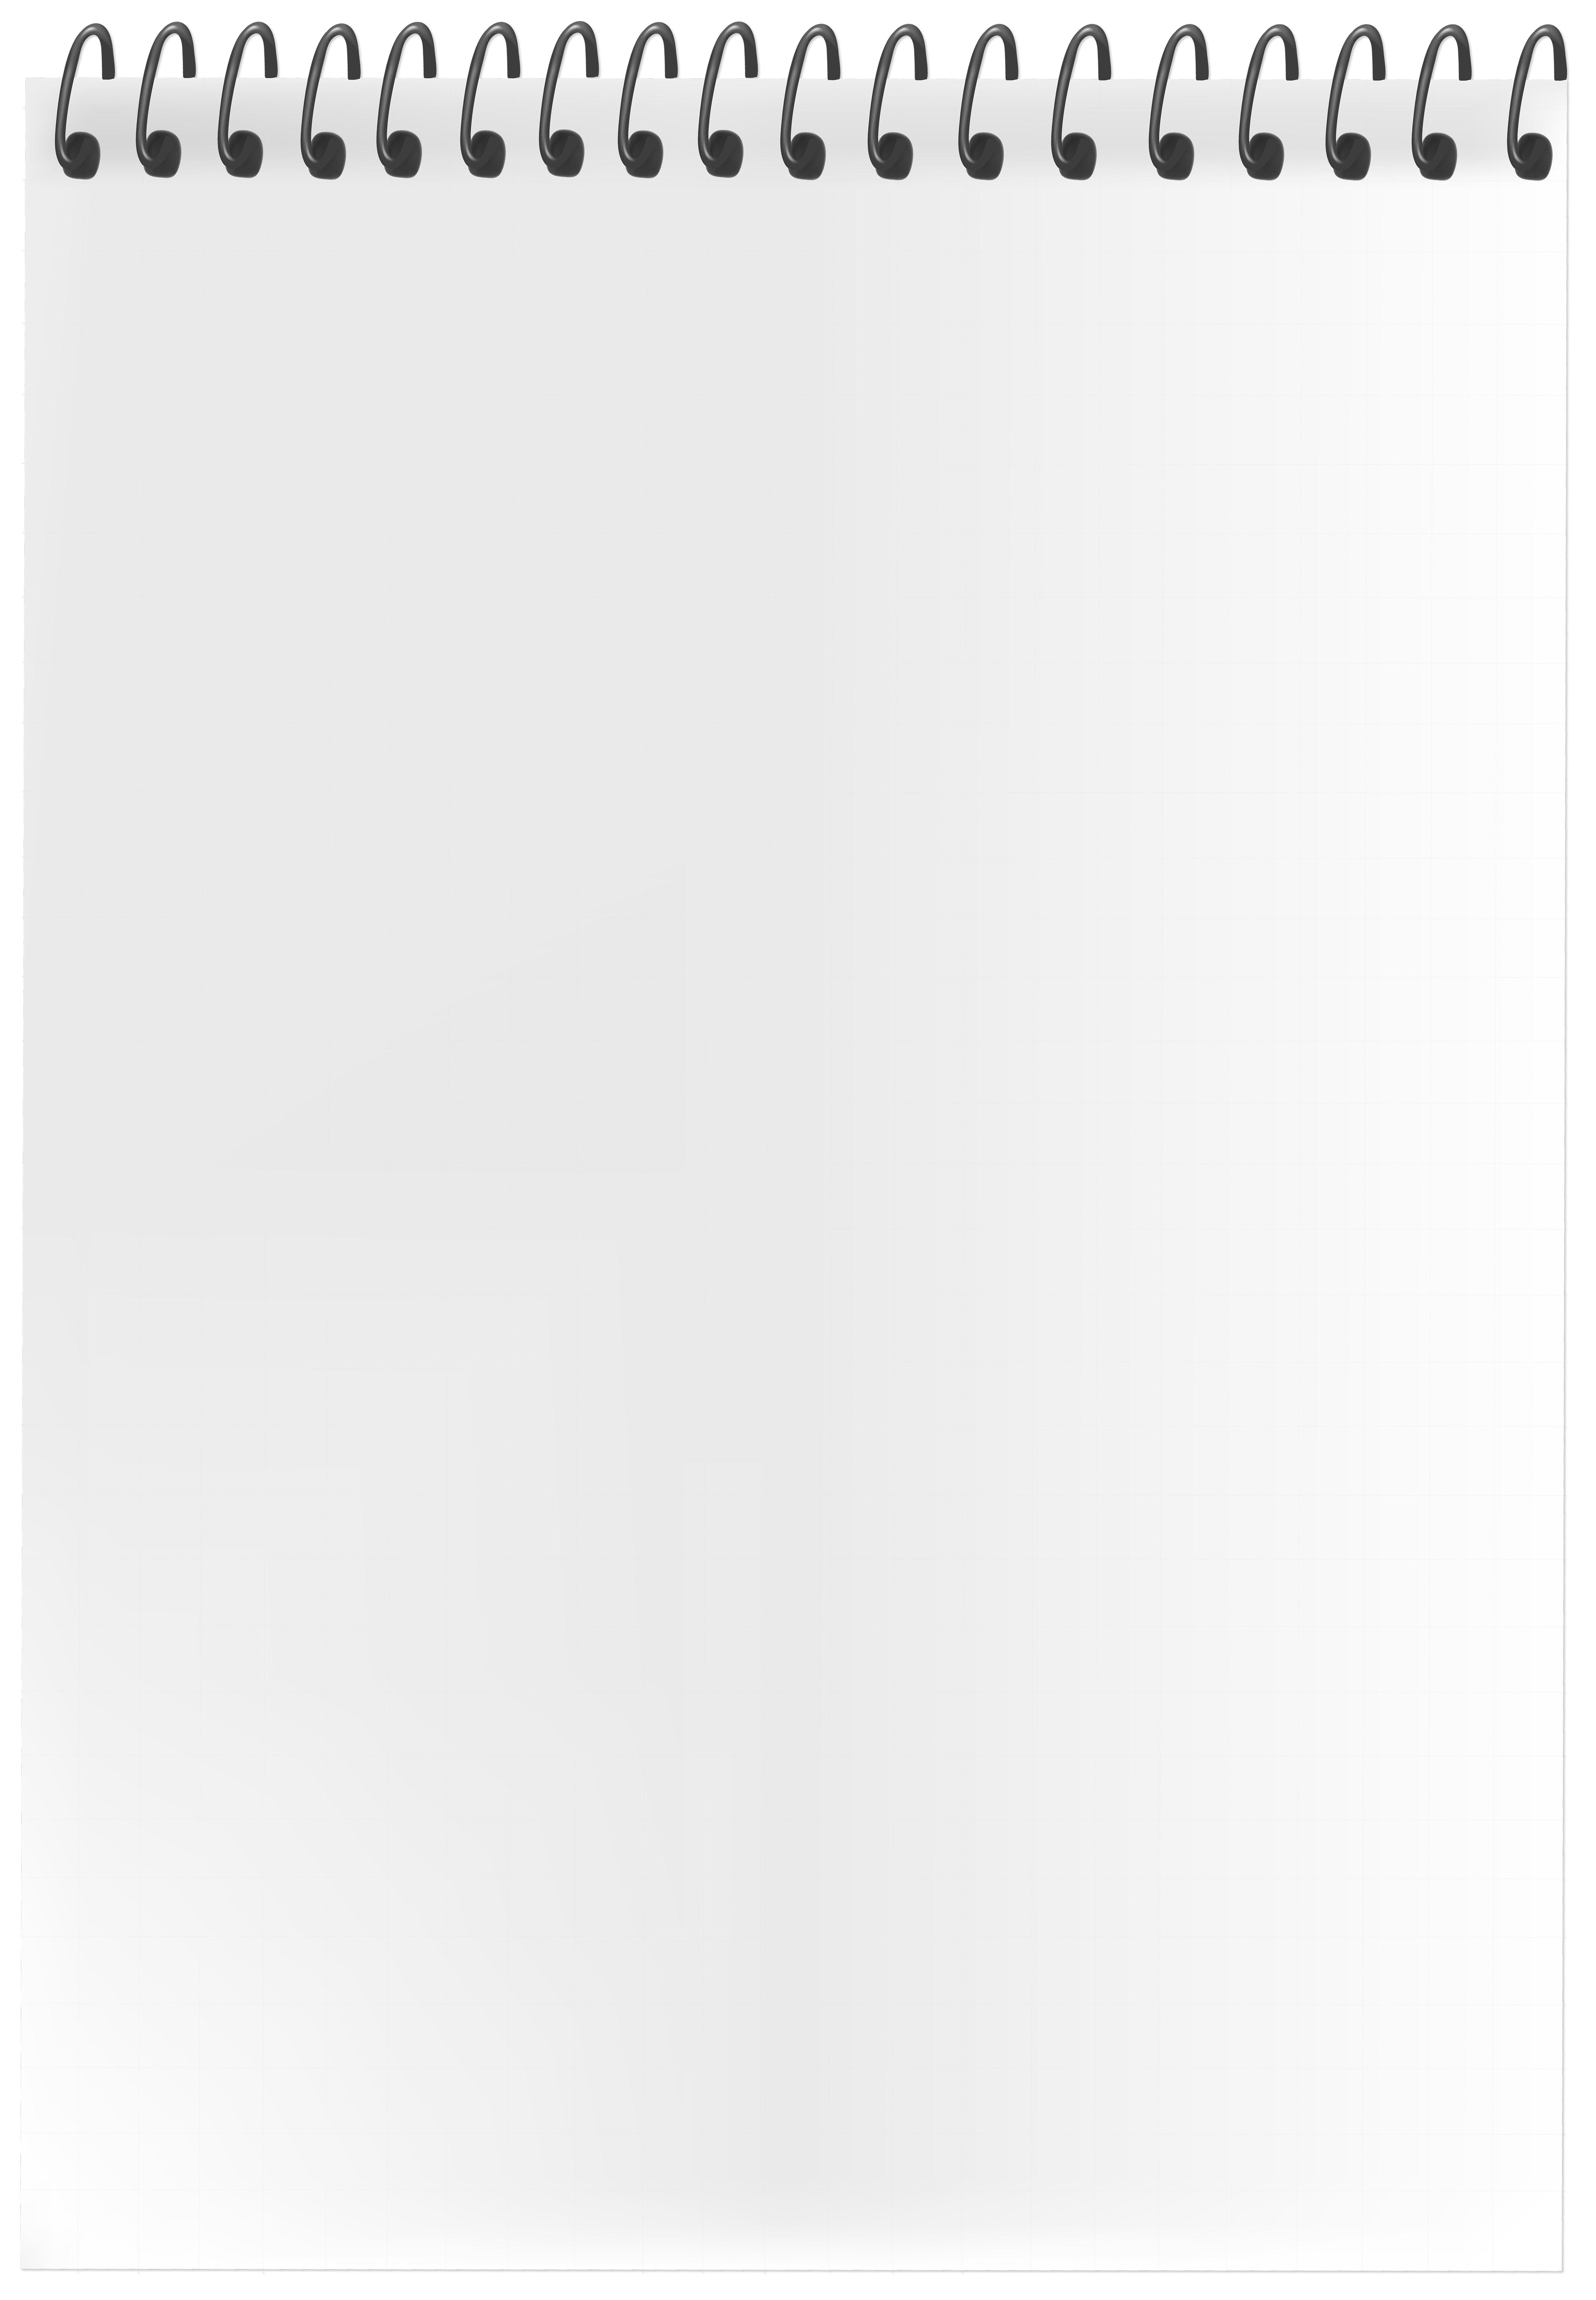 Spiral Blank Page PNG Clip Art Image .gallery.yopriceville.com